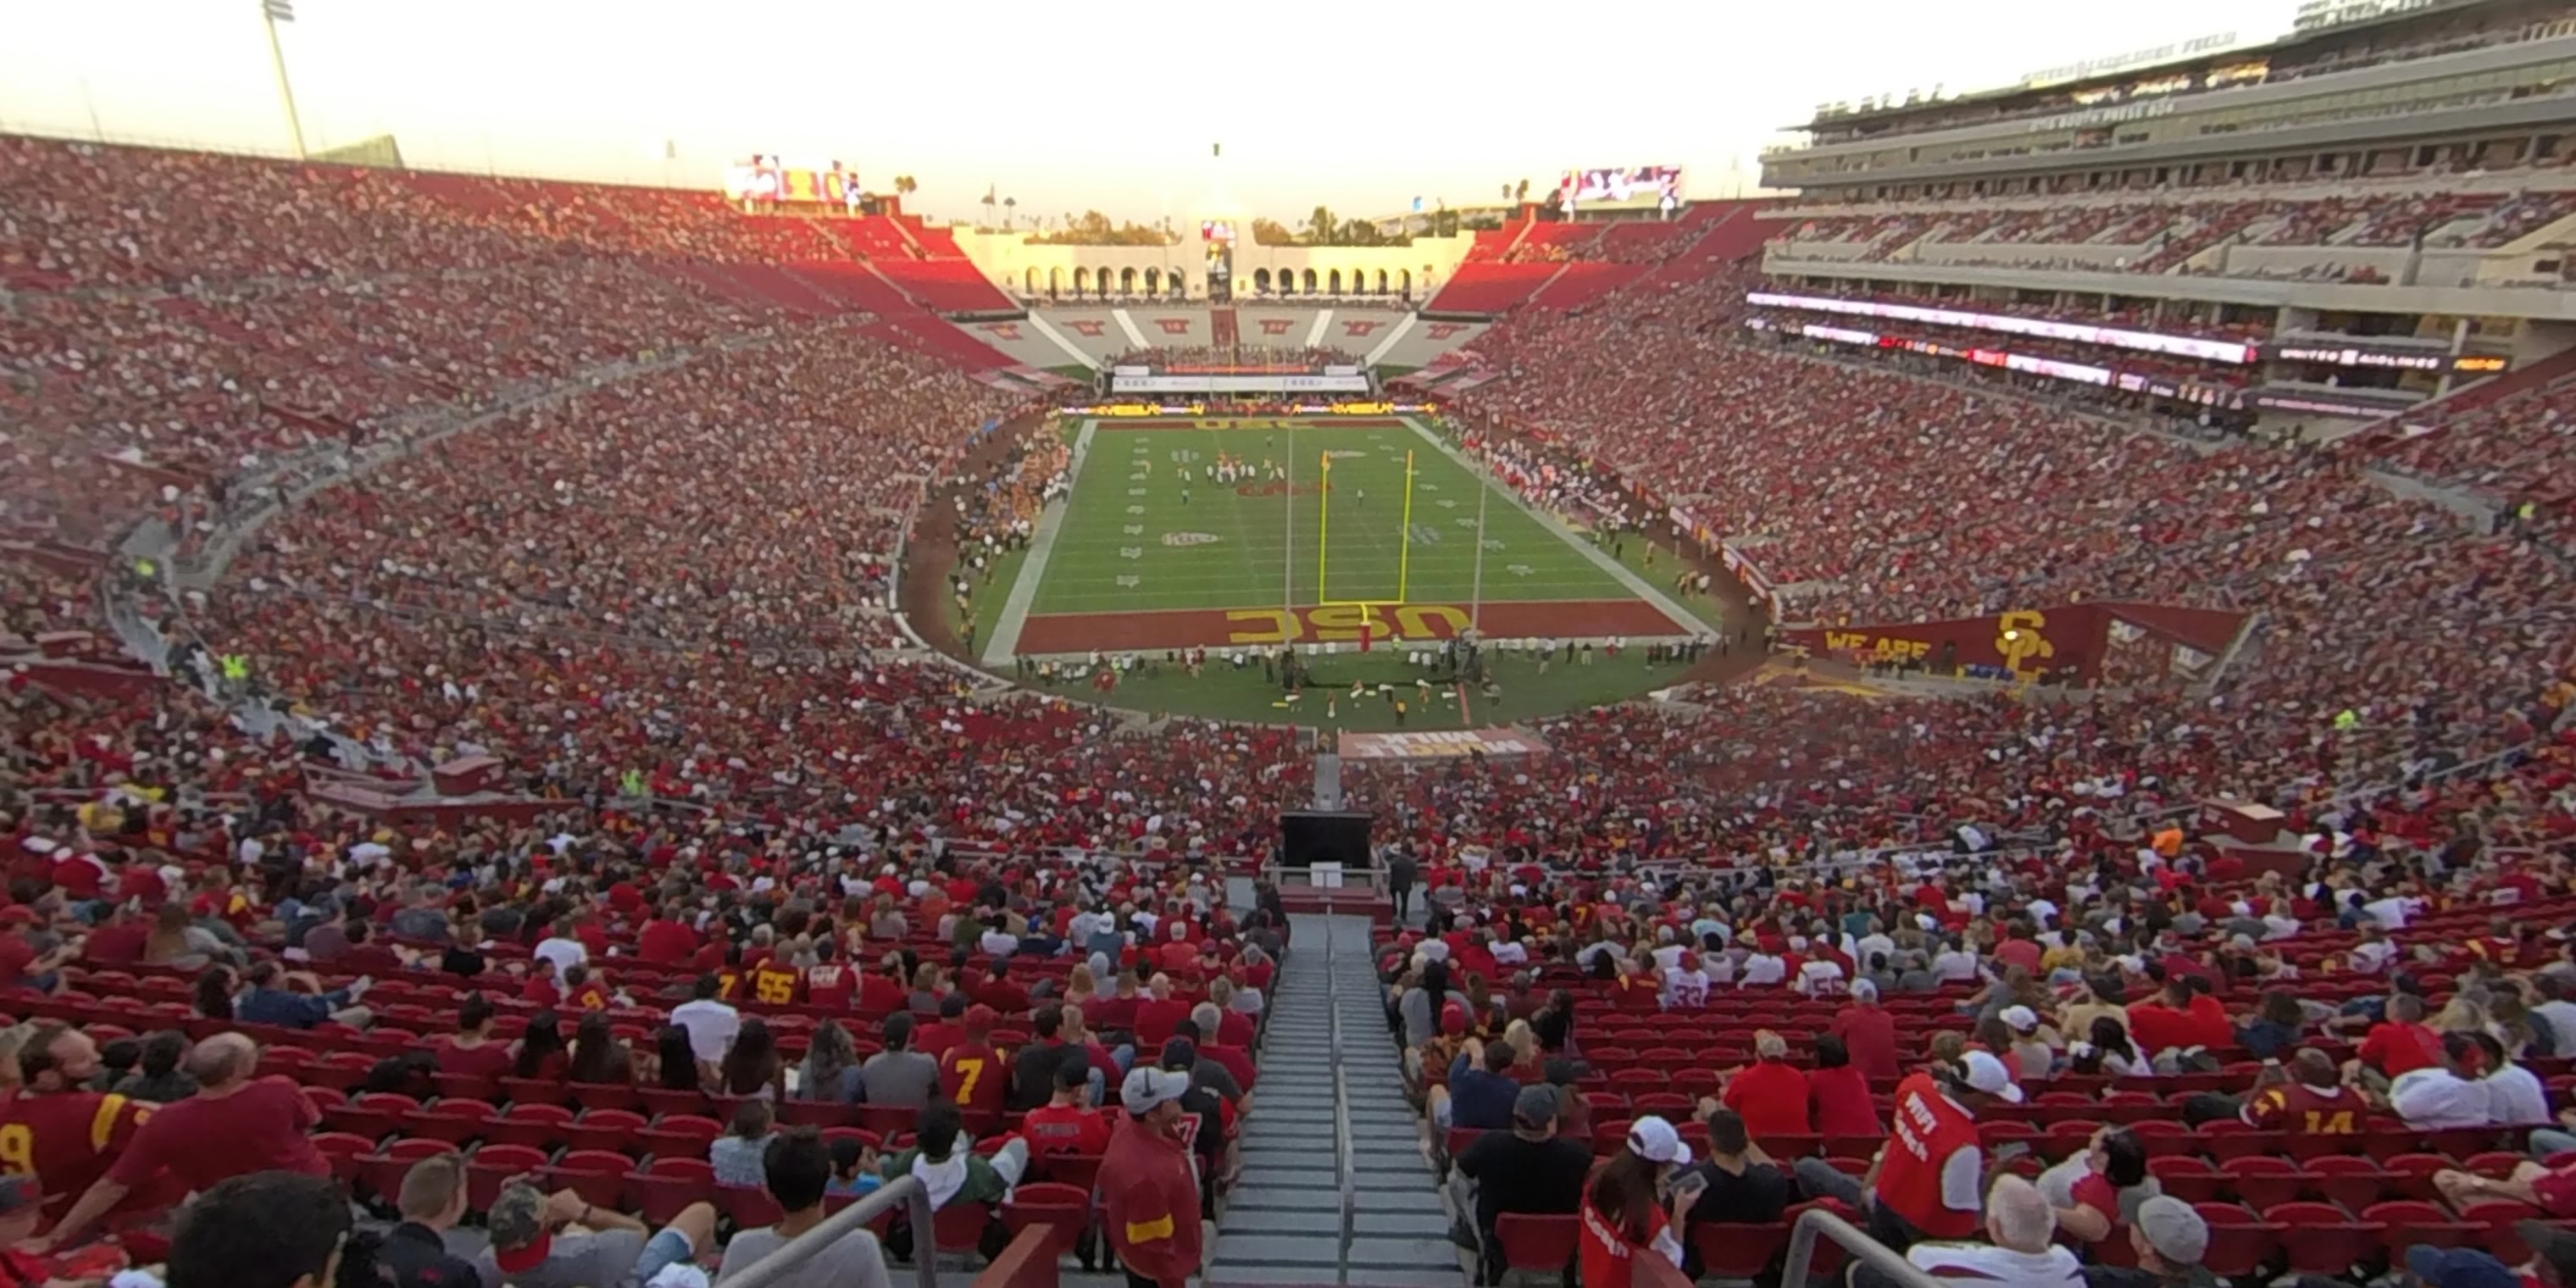 section 314 panoramic seat view  - los angeles memorial coliseum